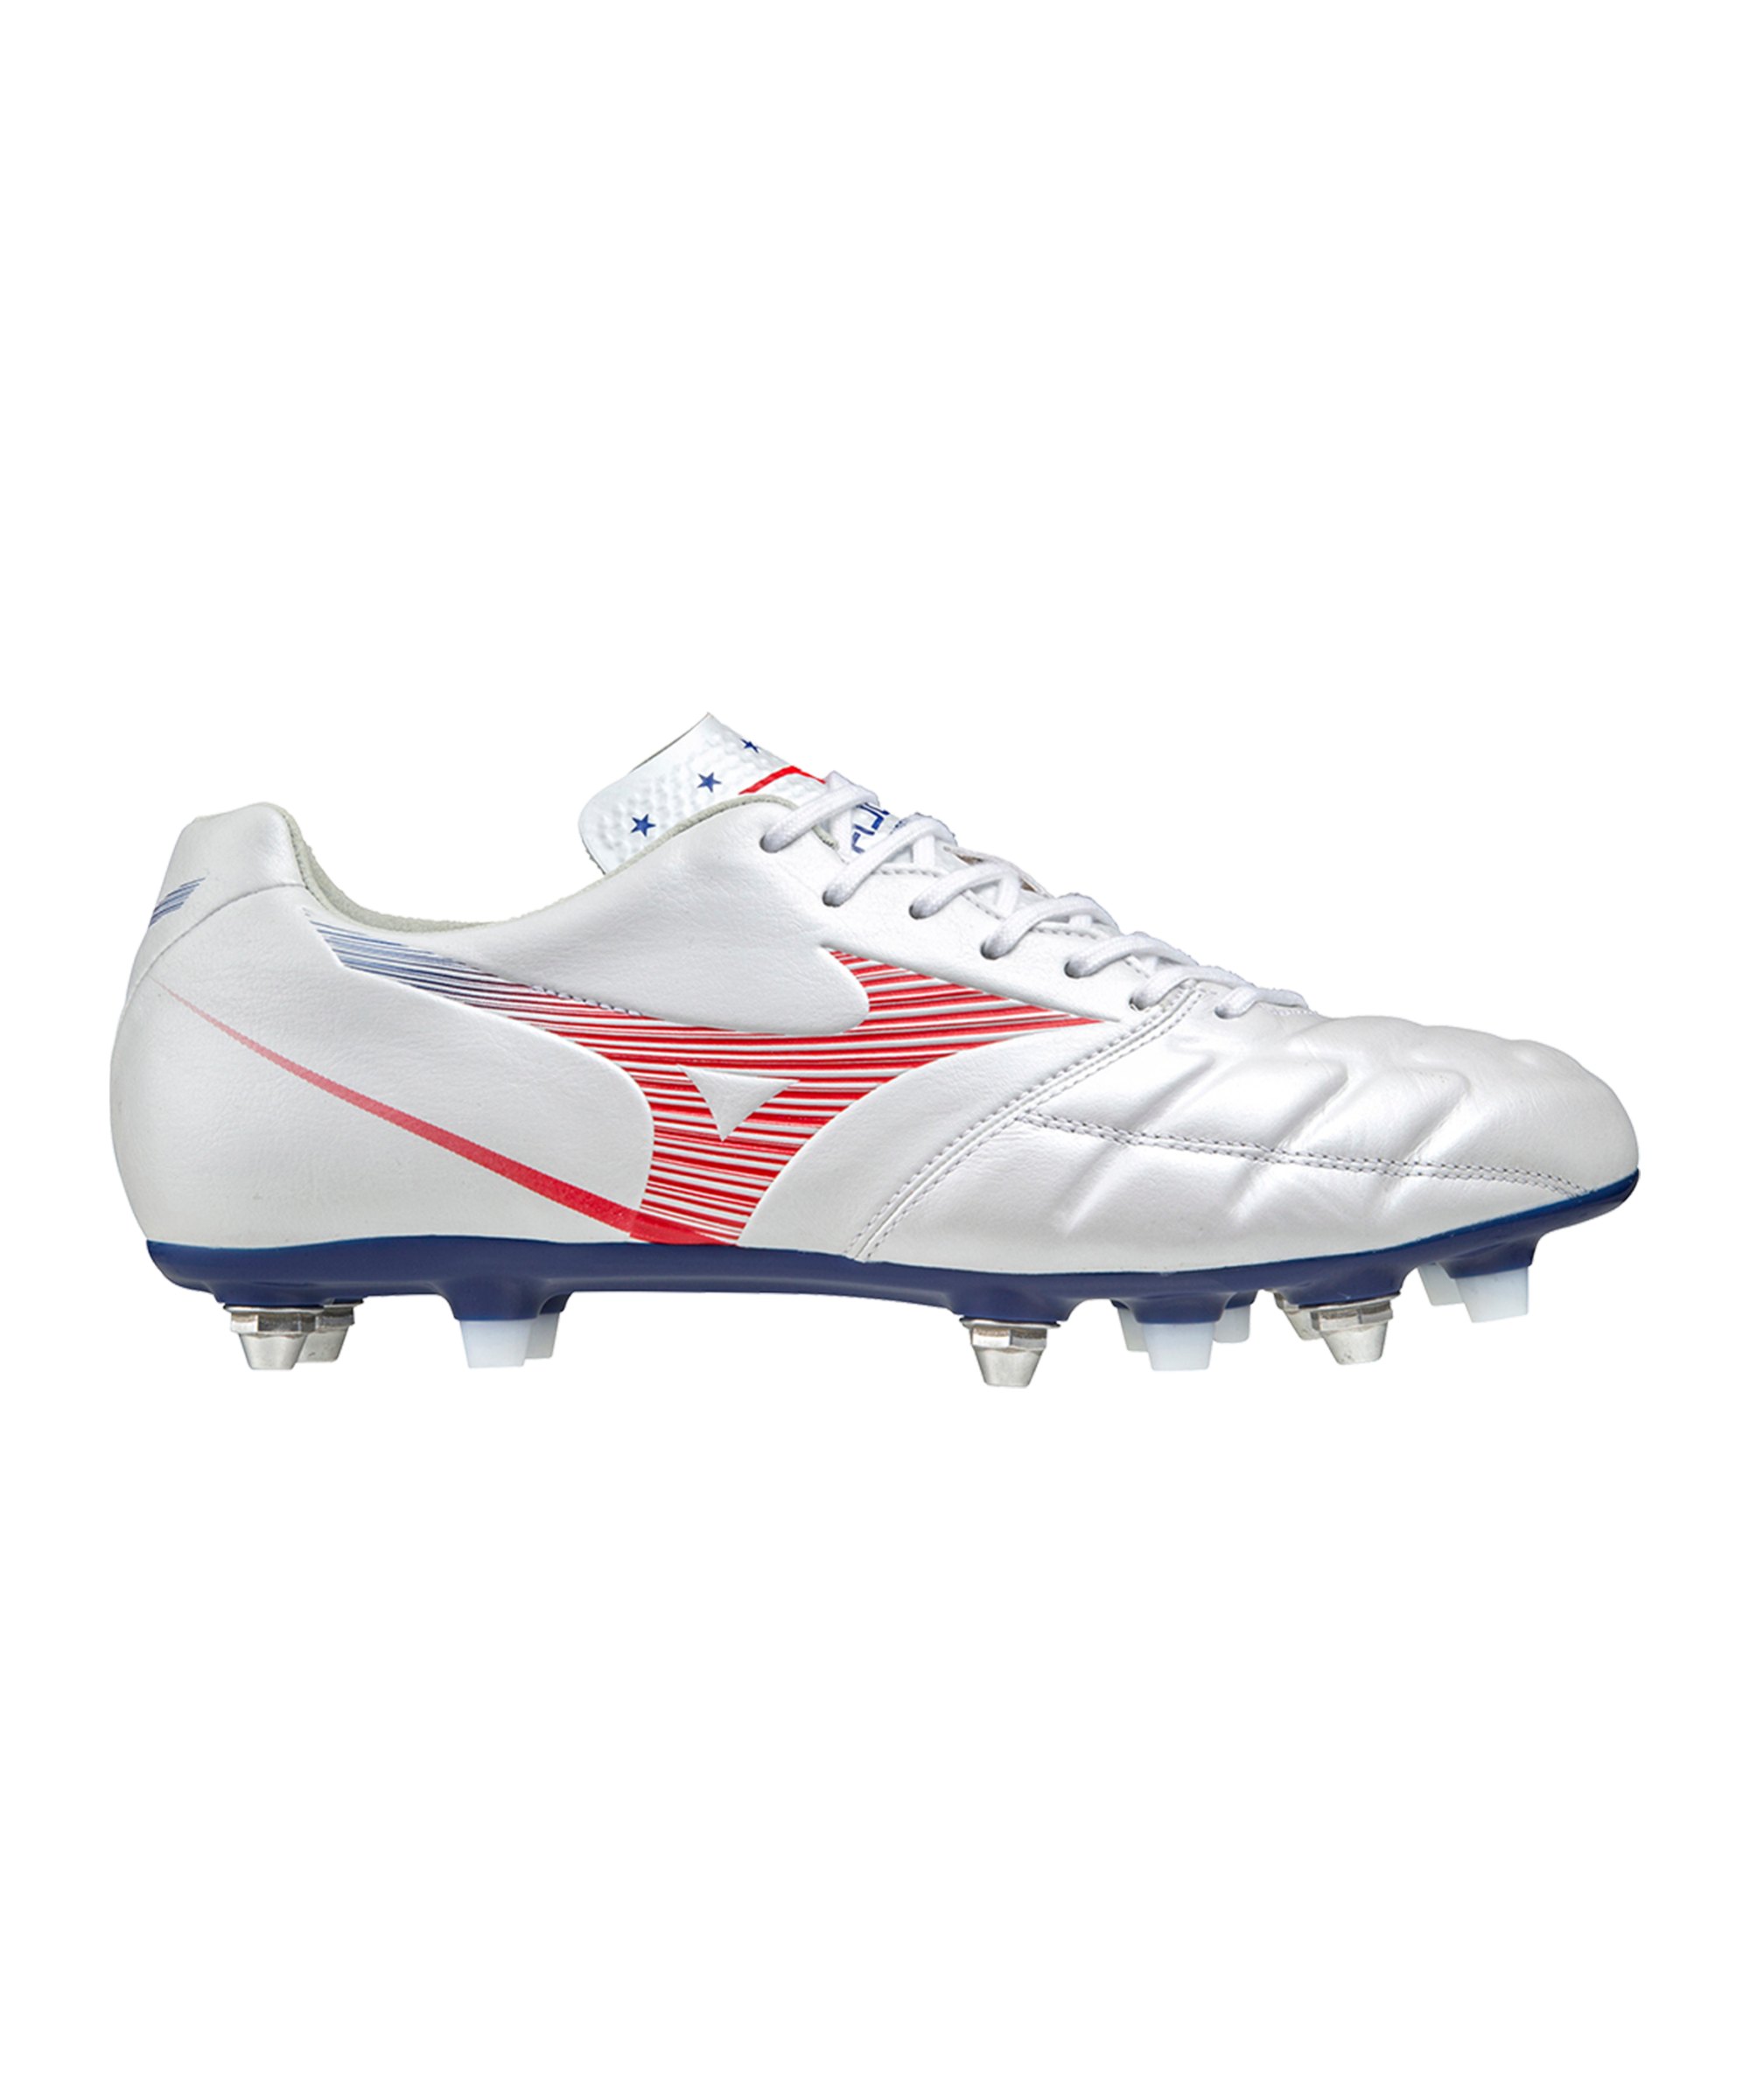 Mizuno Rebula Cup Next Wave Made in Japan Mix Weiss Rot Blau F62 - weiss